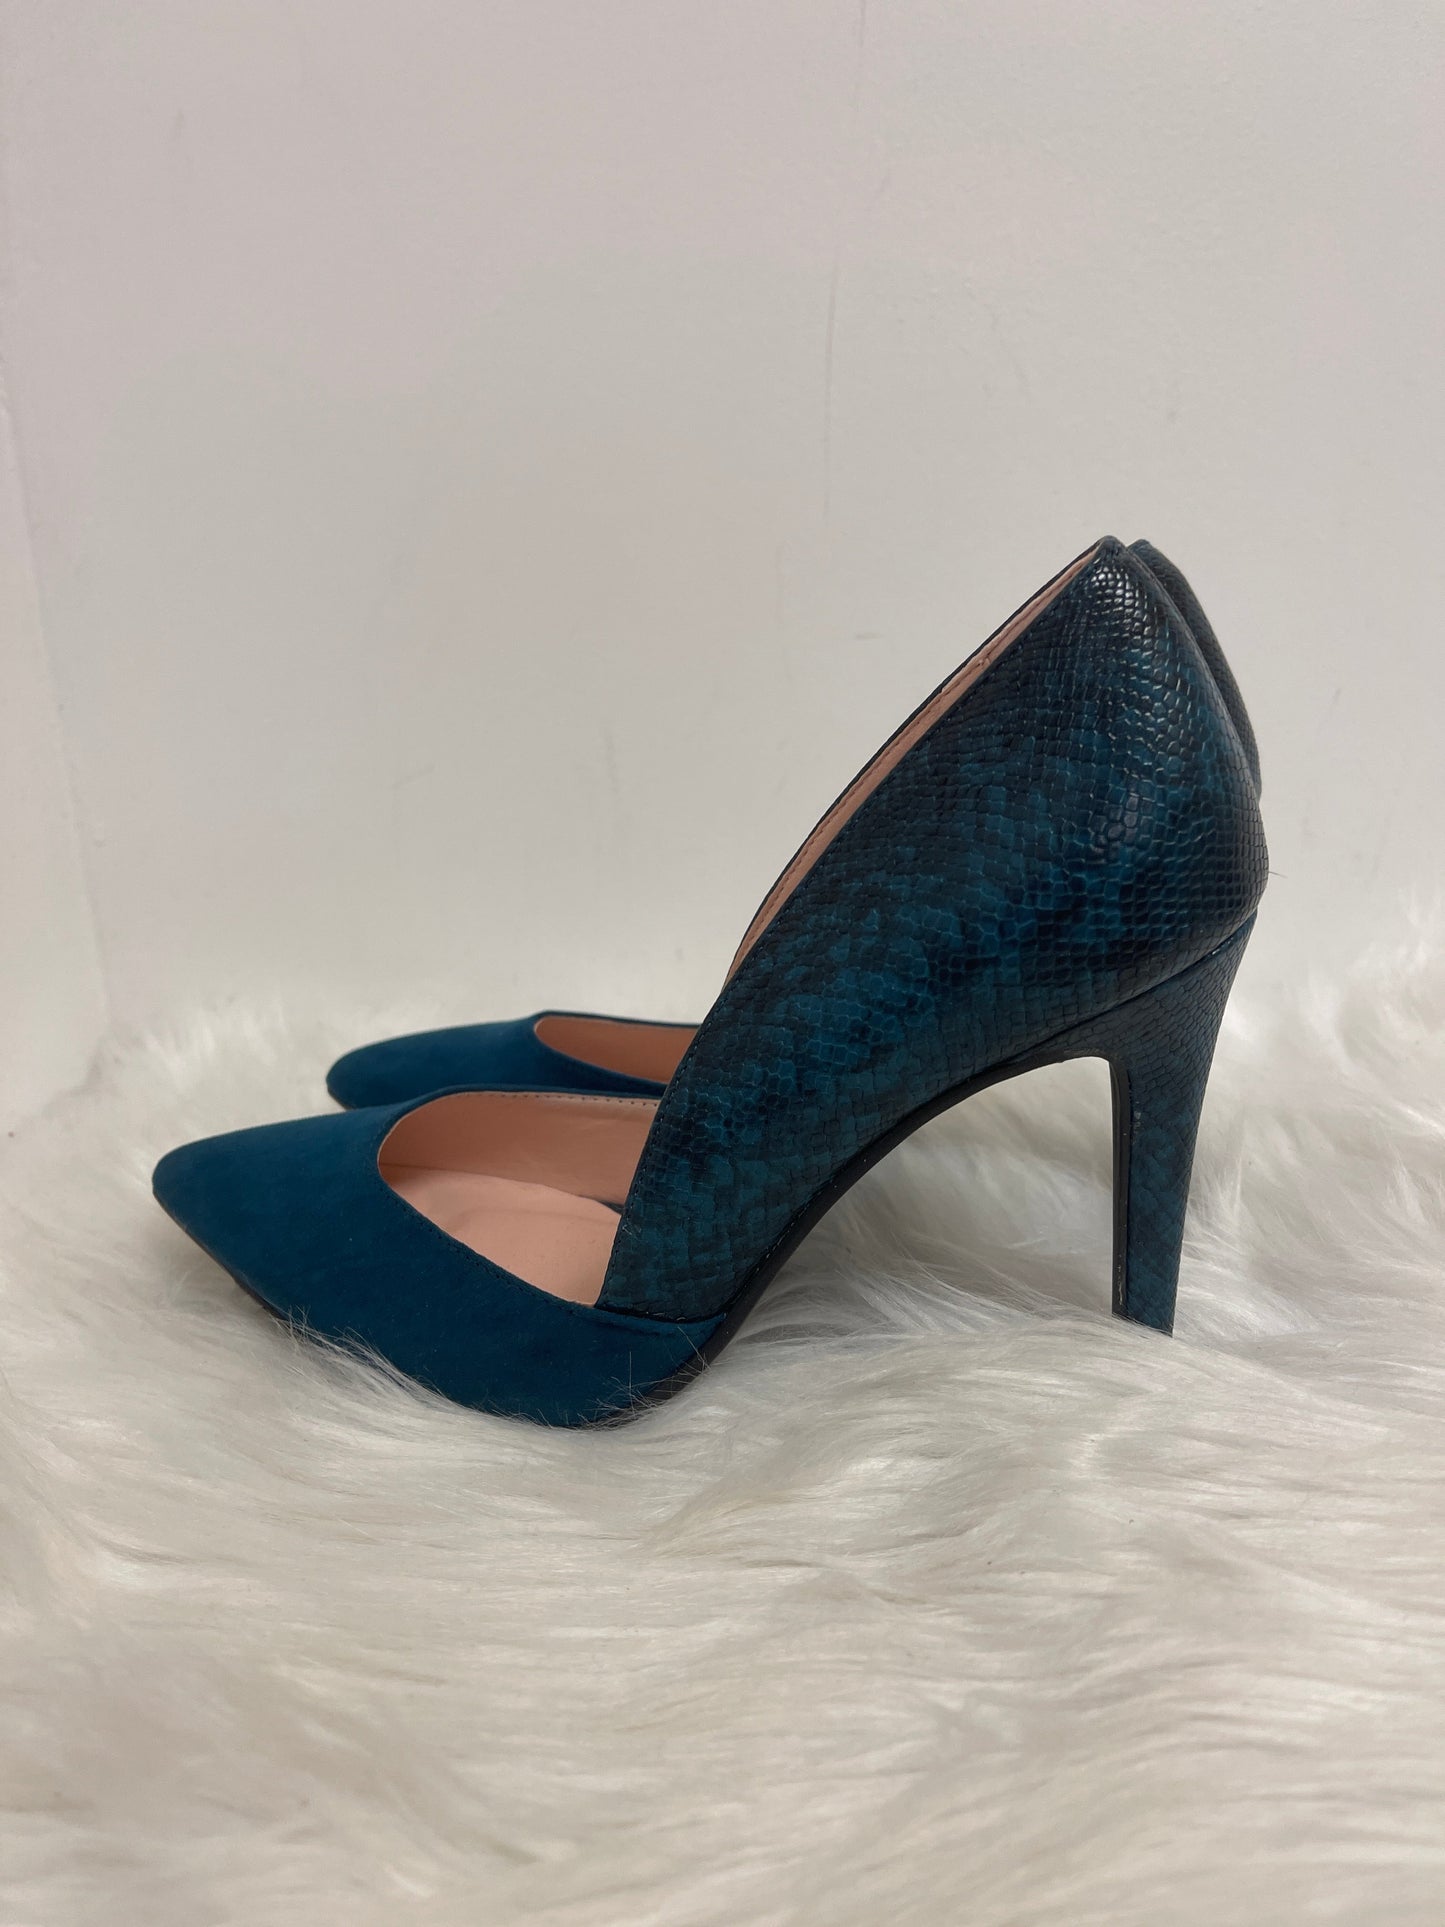 Shoes Heels Stiletto By Chinese Laundry  Size: 7.5